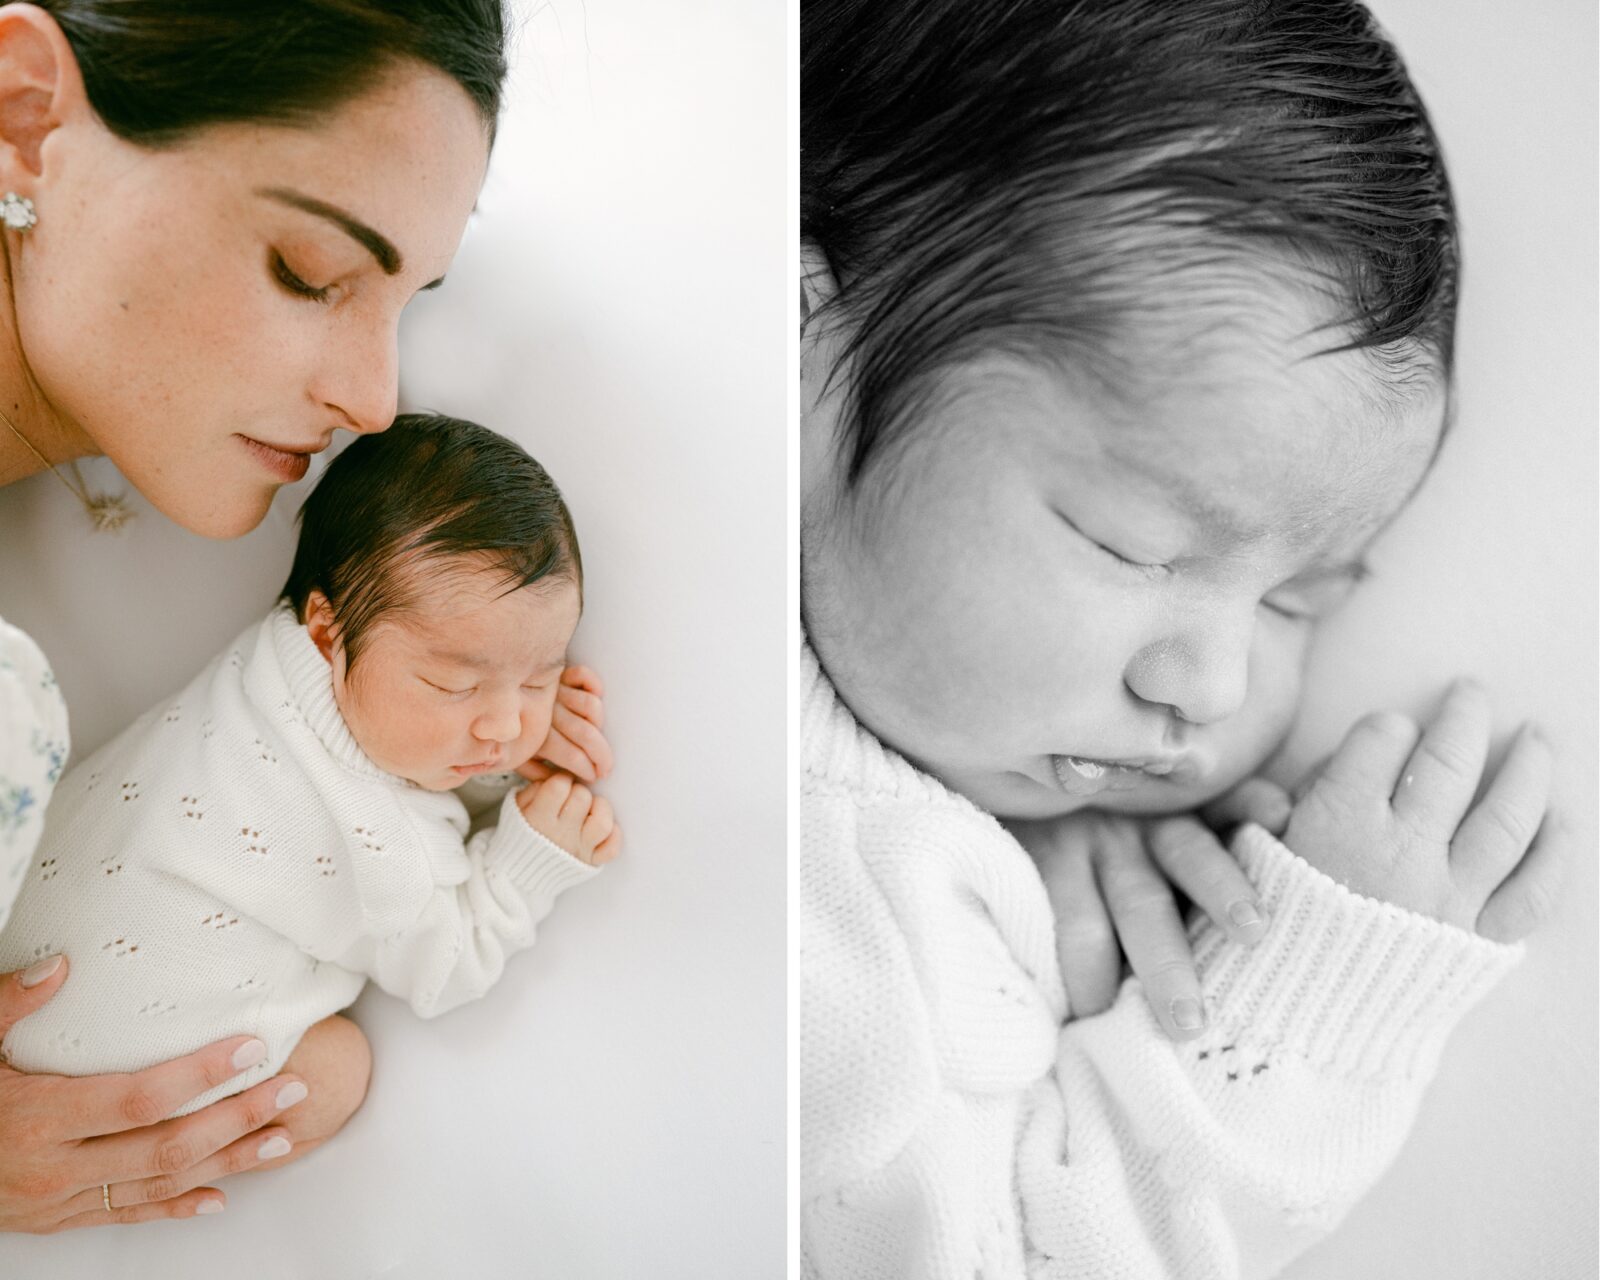 How to prepare for your Miami Newborn Photoshoot